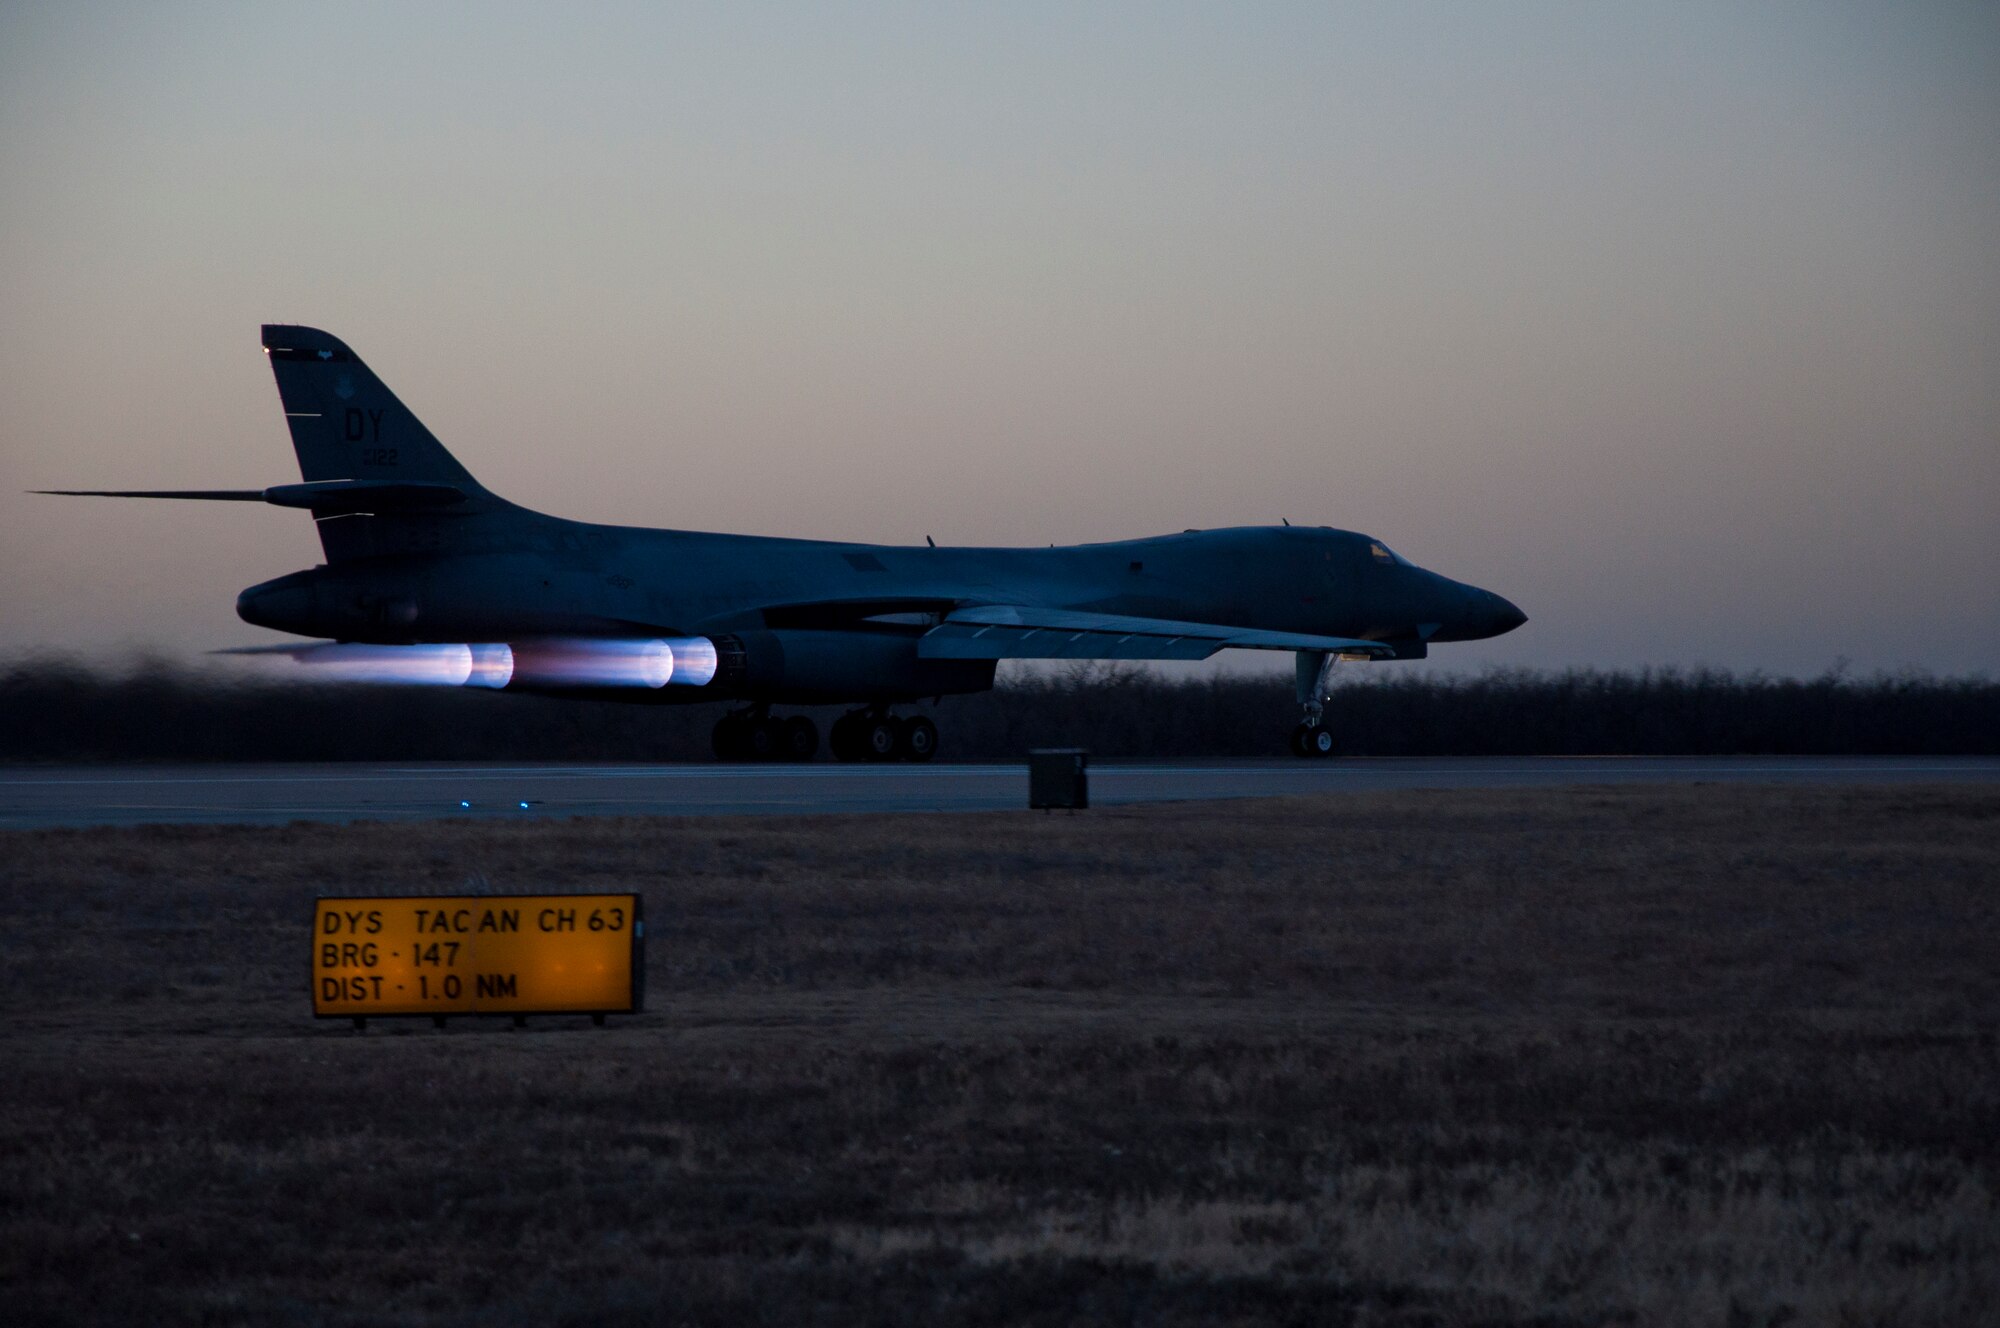 The first newly upgraded operational B1-B Lancer prepares to take flight Jan. 21, 2014, at Dyess Air Force Base, Texas. The B-1B Lancer was recently upgraded with a new Integrated Battle Station. The IBS is a combination of three different upgrades, which include a Fully Integrated Data Link, a Vertical Situation Display upgrade, and a Central Integrated System upgrade. Developmental testing was conducted at Edwards AFB, Calif. and the 337th Test and Evaluation Squadron will now began operational testing at Dyess. (U.S. Air Force photo by Staff Sgt. Richard Ebensberger/Released)